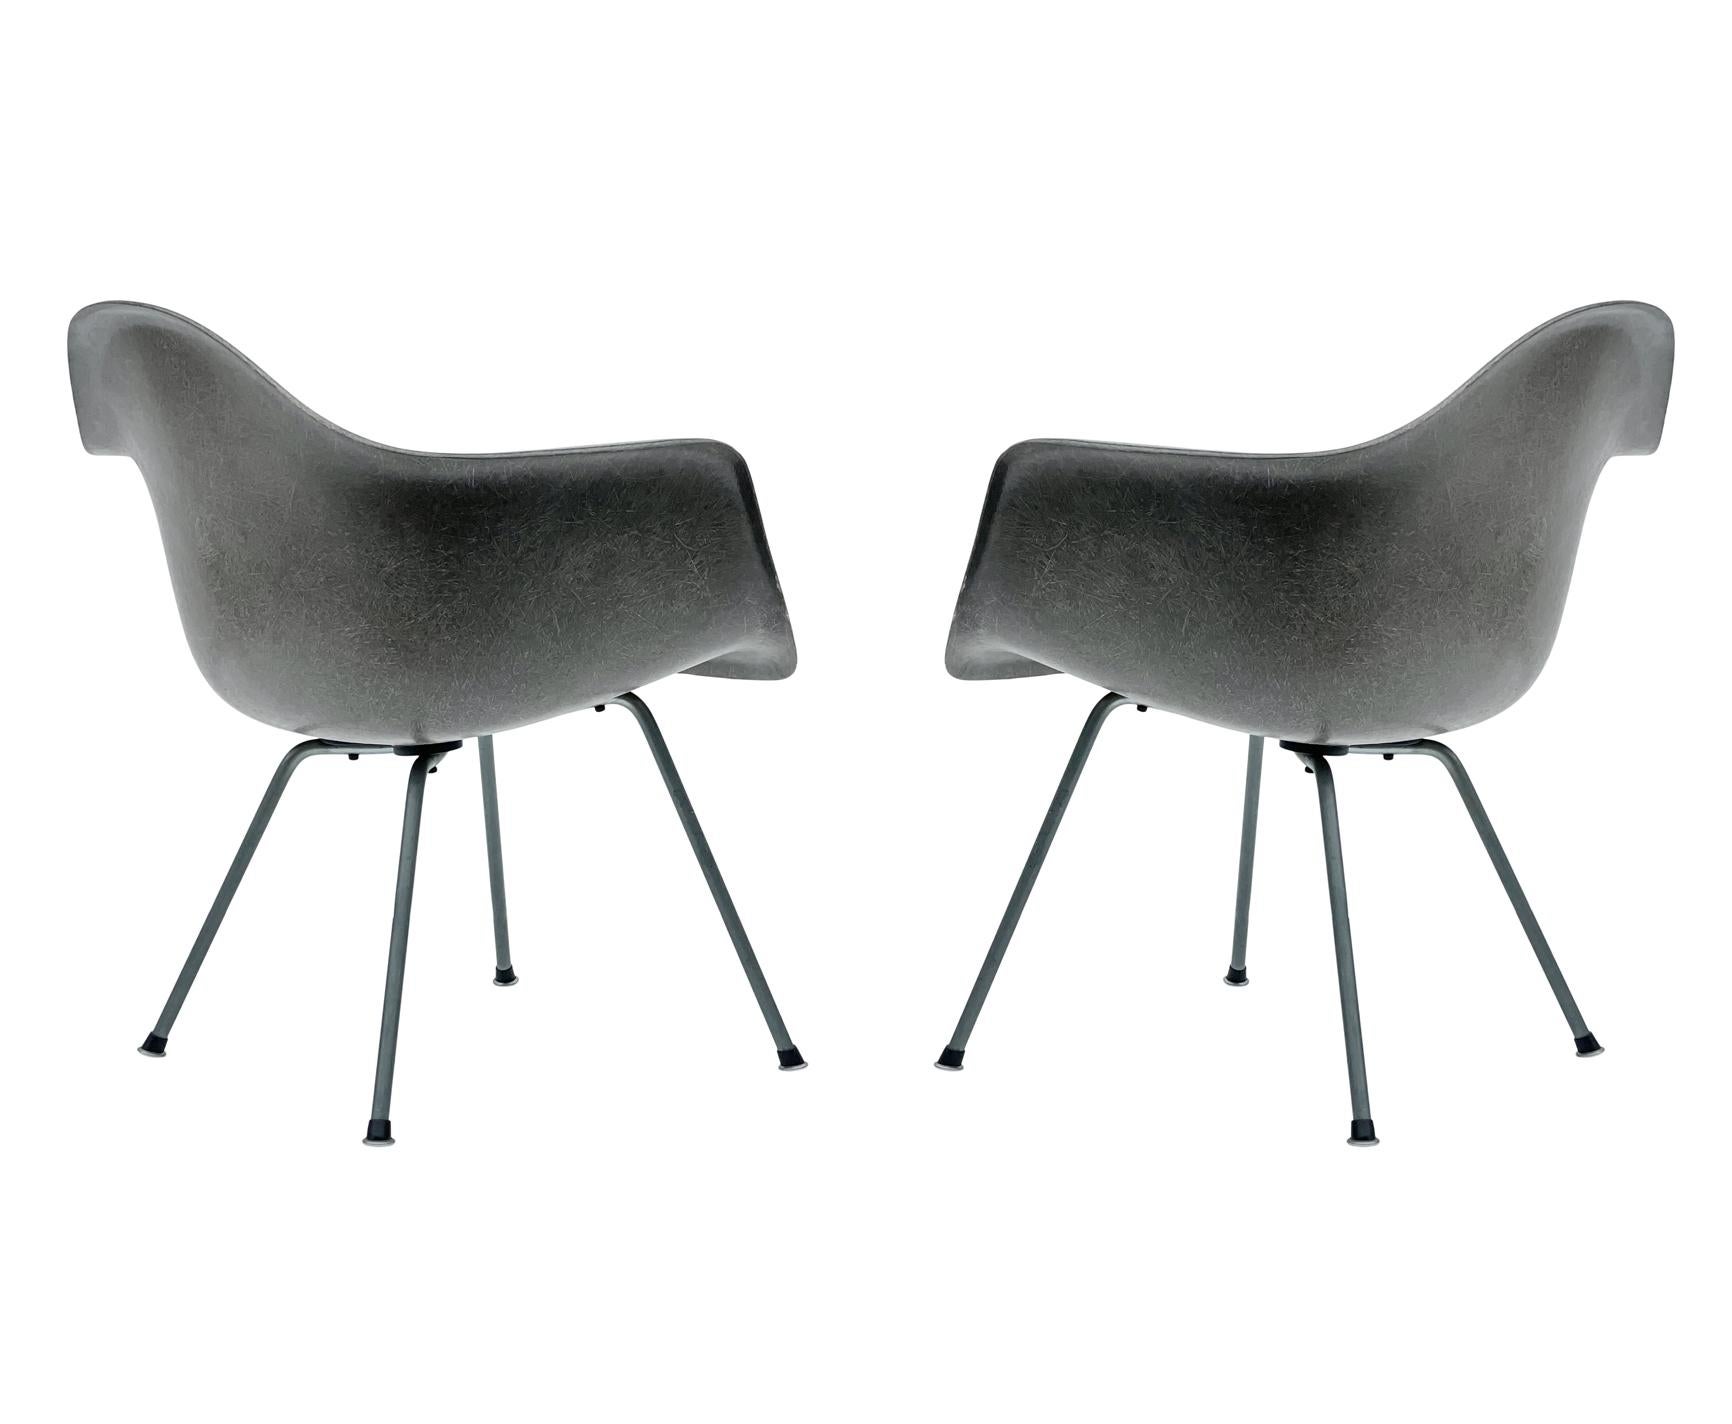 Pair of Early 2nd Generation Eames Fiberglass LAX Lounge Chairs in Elephant Gray For Sale 3